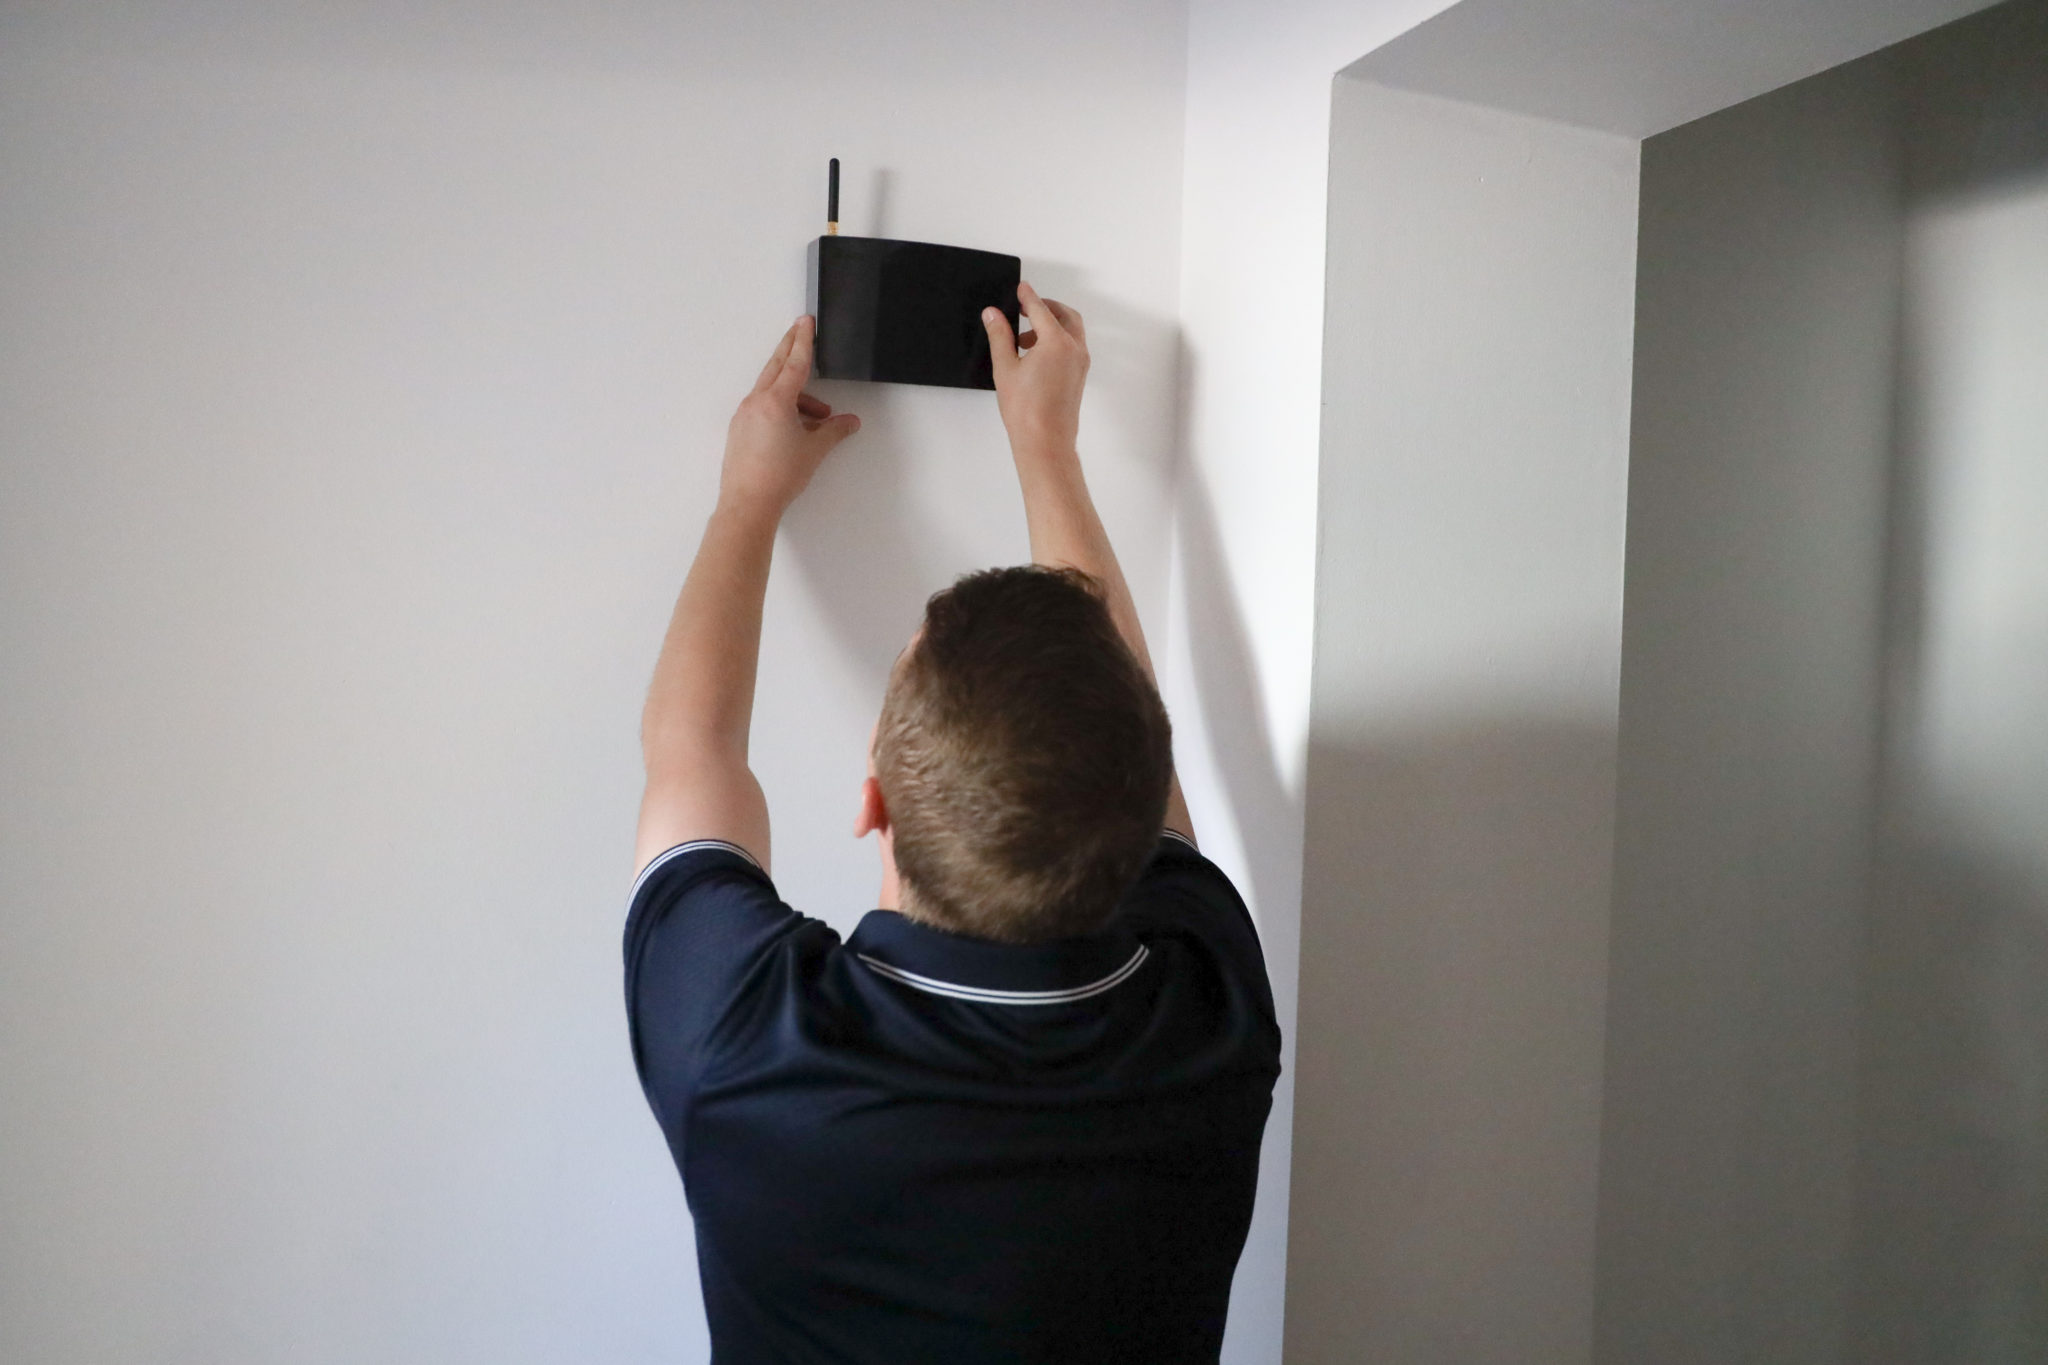 Installing SMART Digital Pest Control at commercial premises in Newcastle